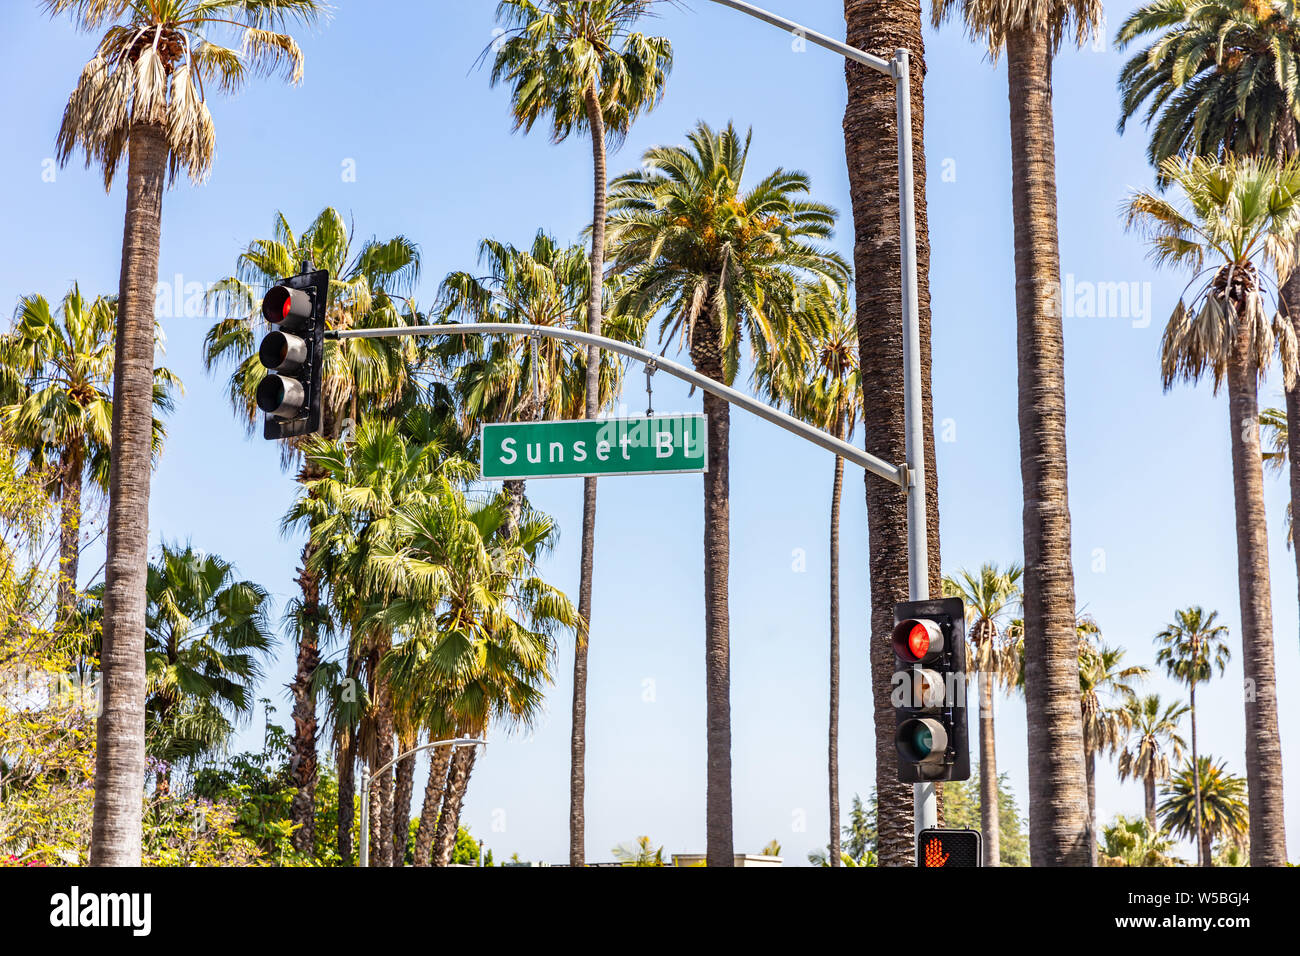 Sunset Bl. LA, California, USA. Text on green sign, red traffic lights, palm trees and blue sky background. Sunny spring day. Stock Photo